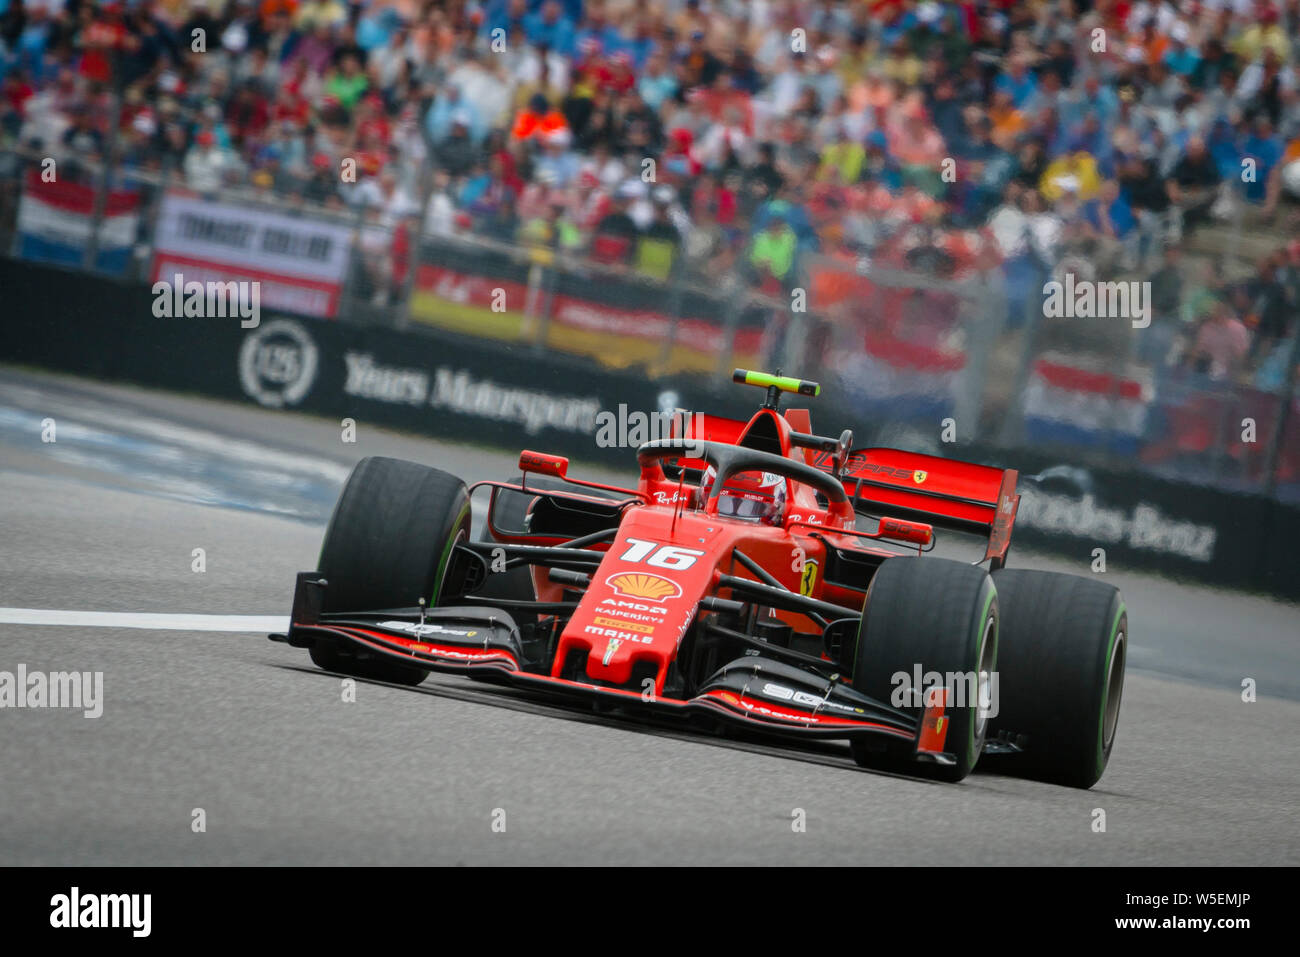 Hockenheim, Germany. 28th July, 2019. Scuderia Ferrari's Monegasque driver Charles Leclerc competes during the German F1 Grand Prix race. Credit: SOPA Images Limited/Alamy Live News Stock Photo